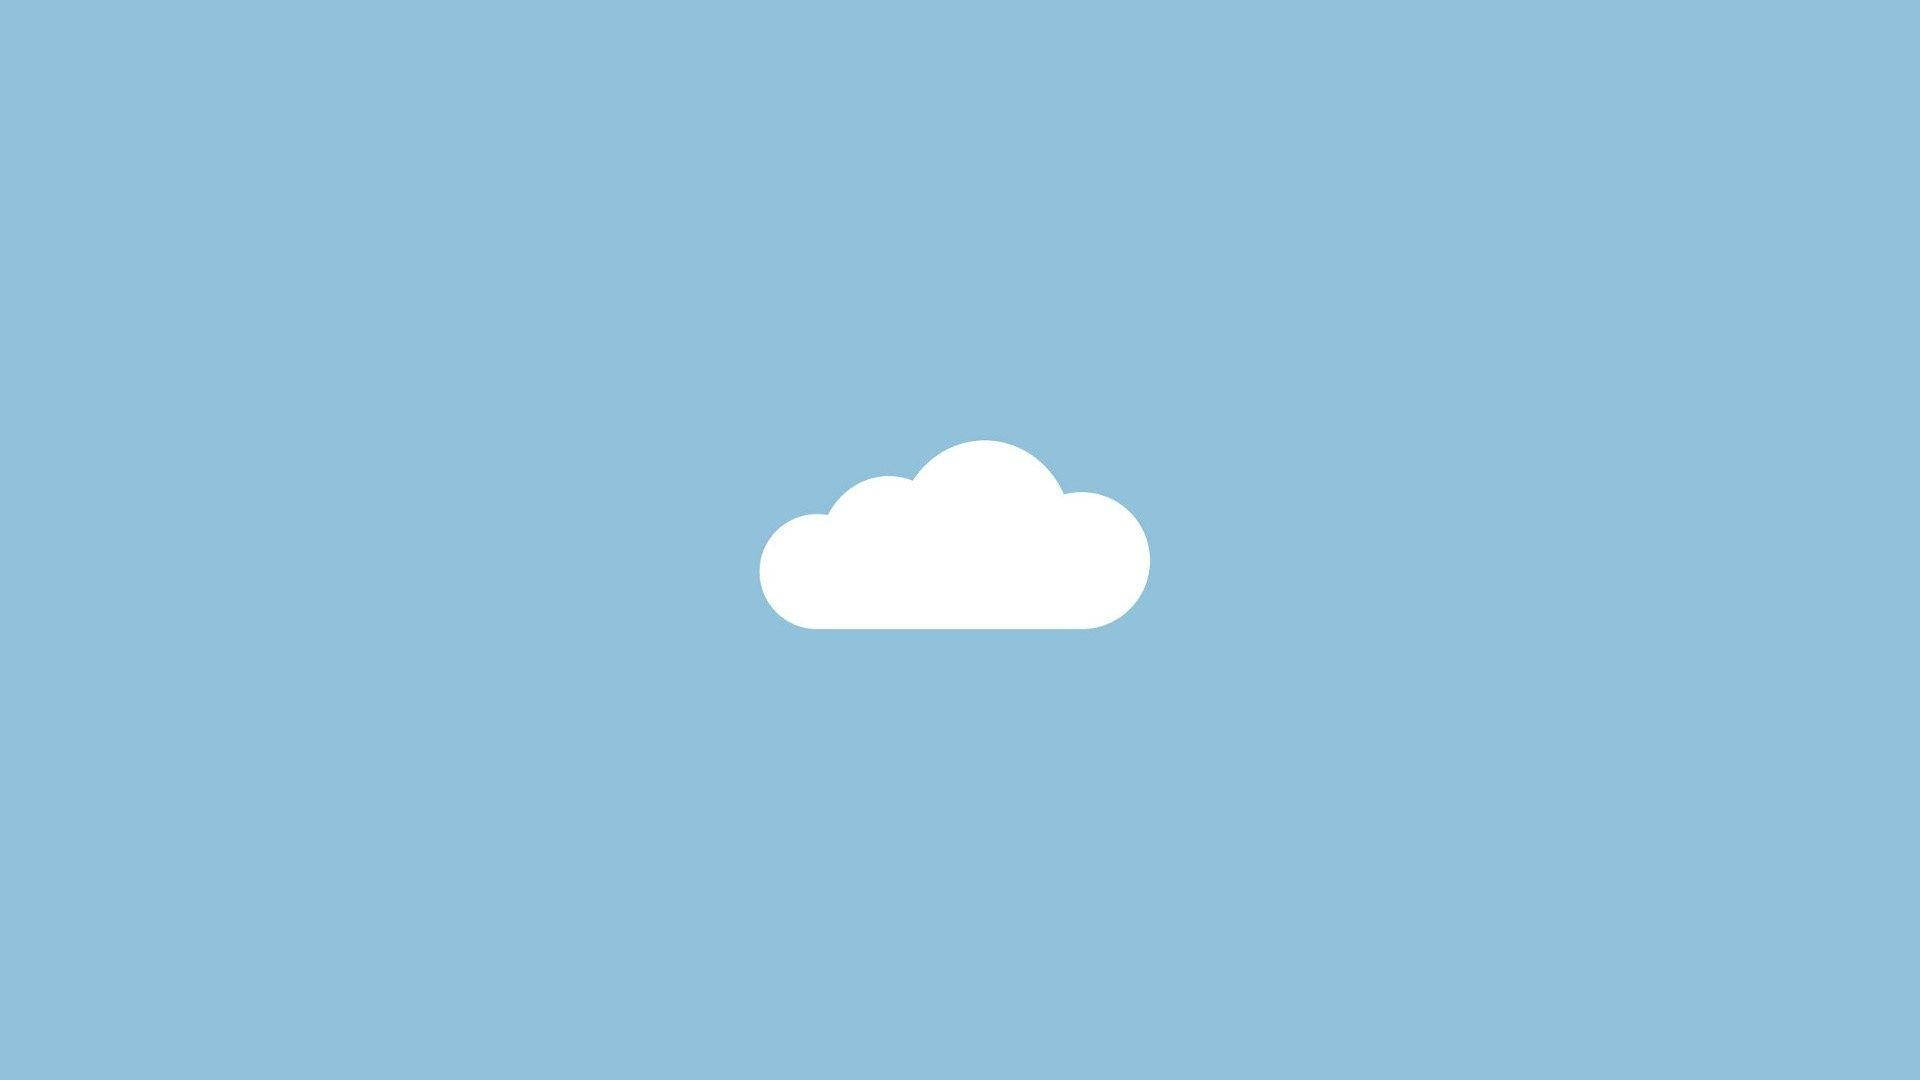 Simple Aesthetic White Cloud Background